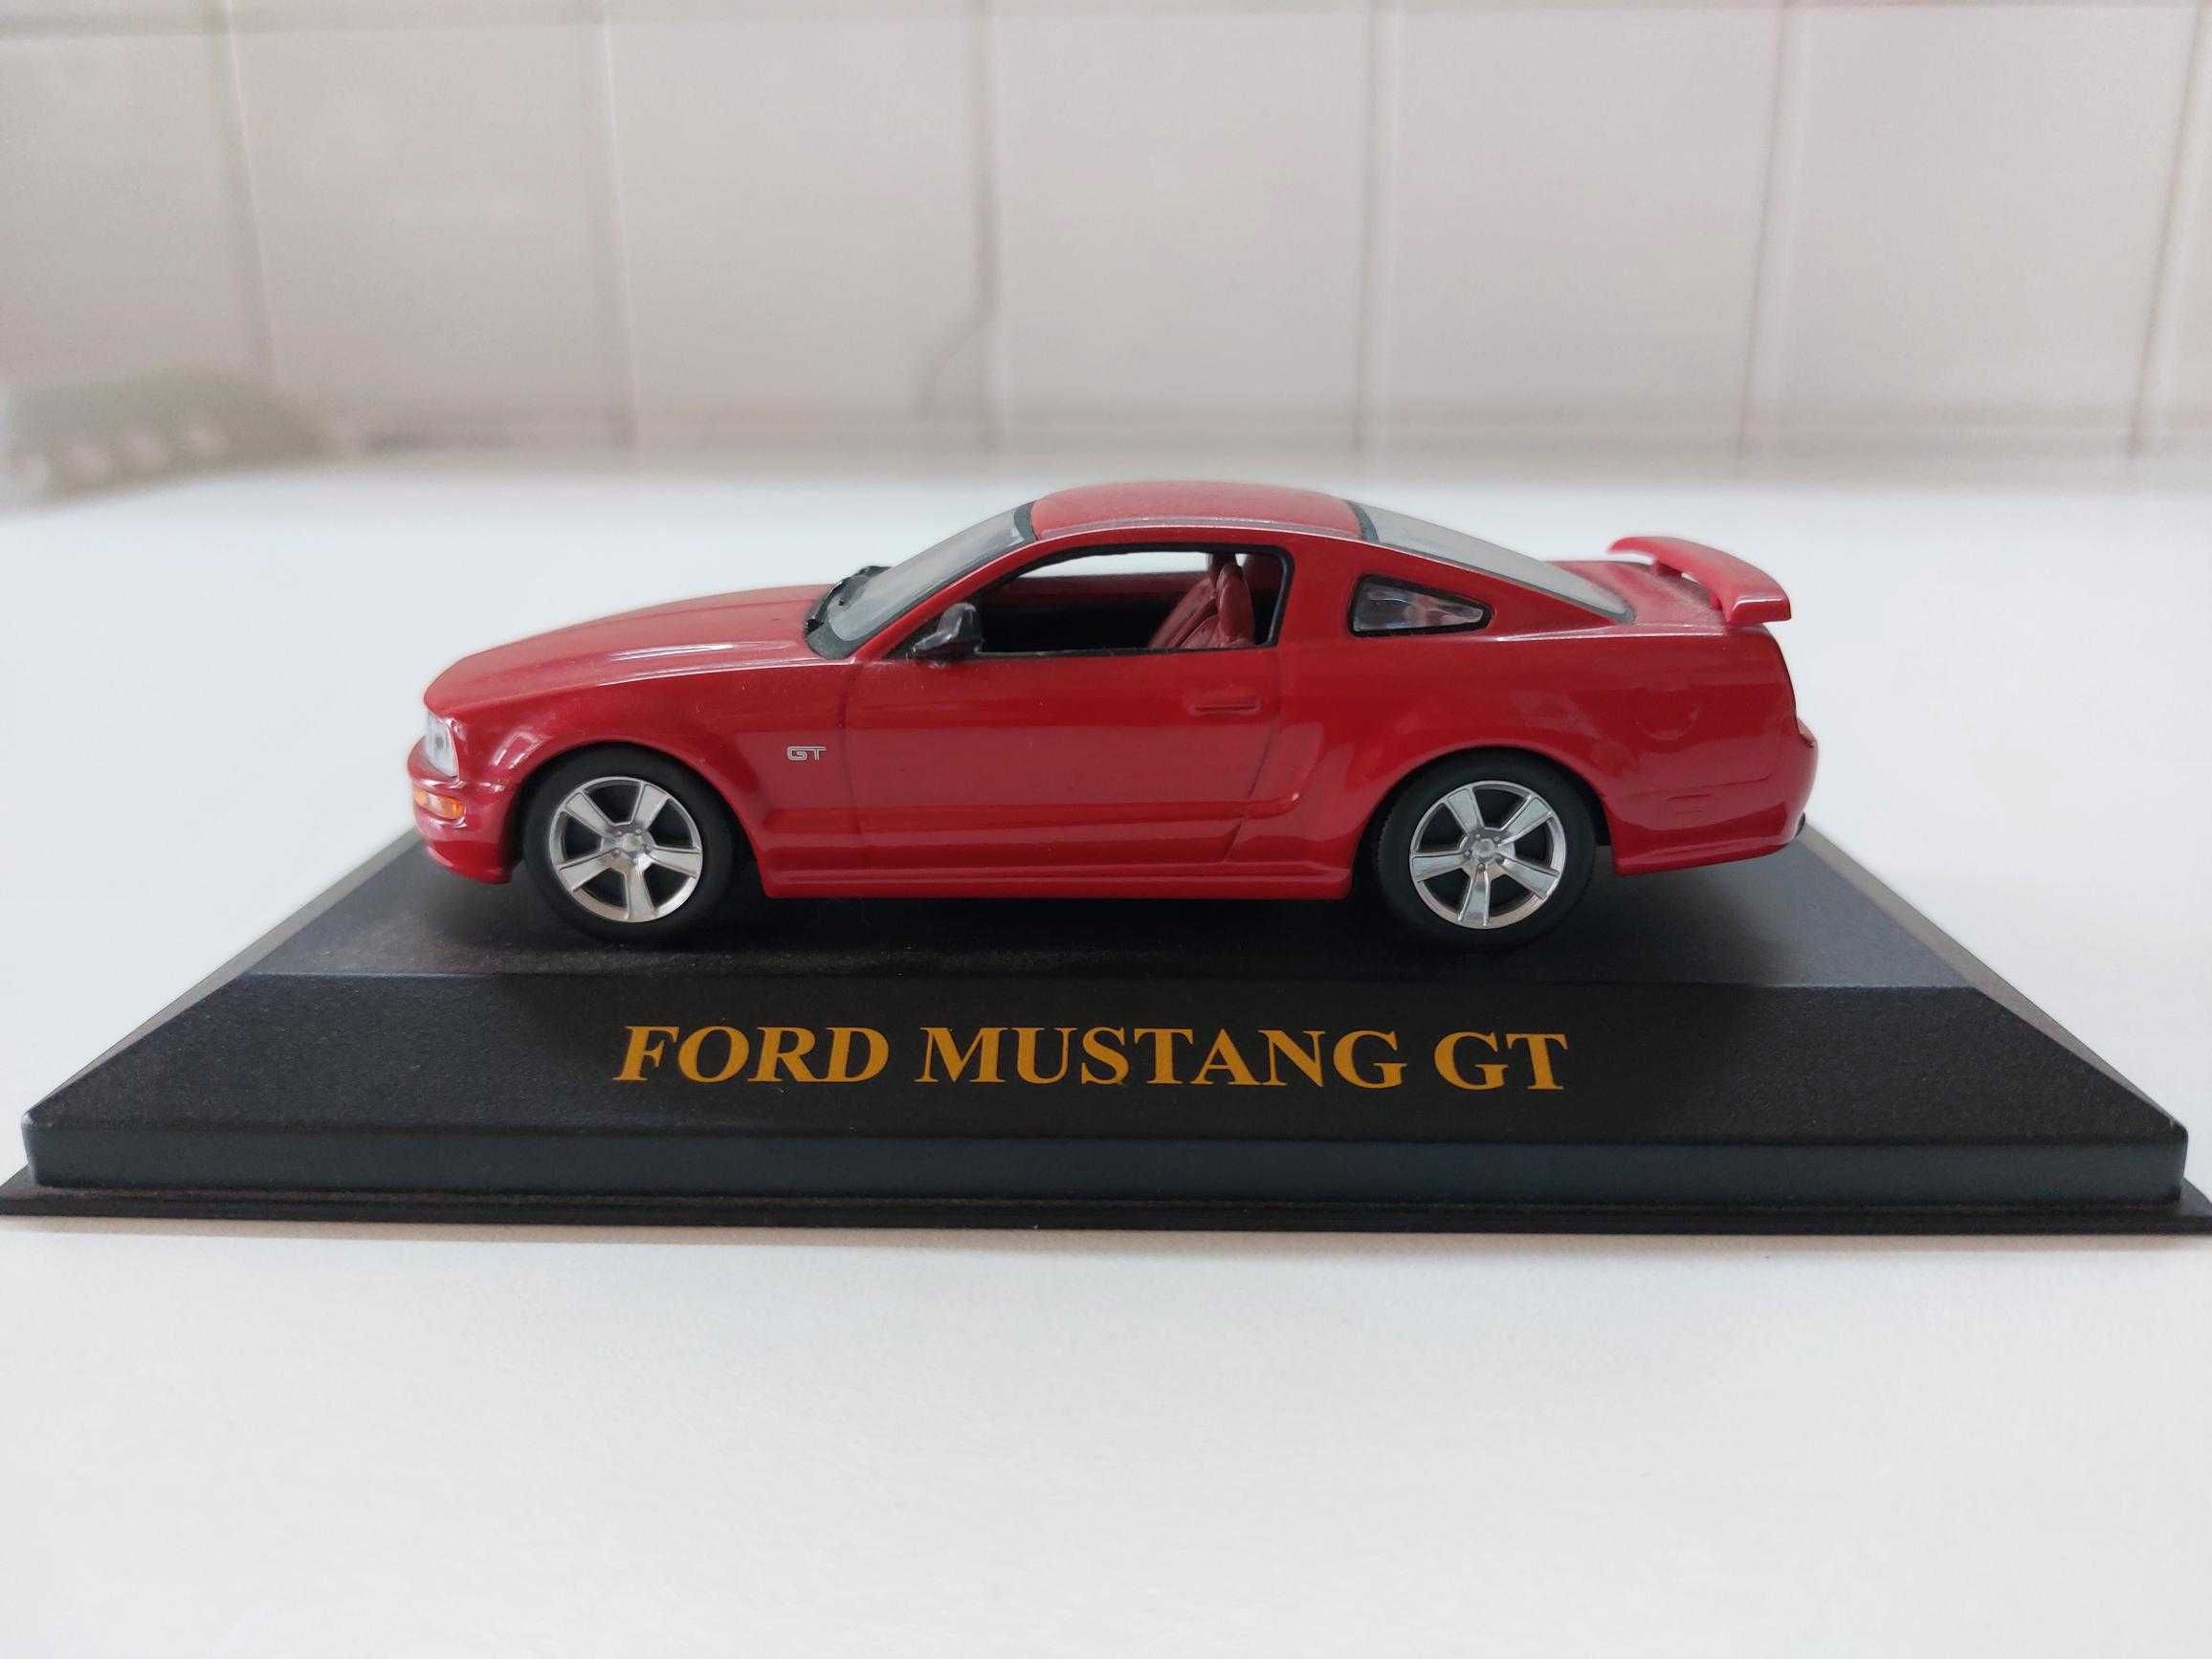 Ford Mustang GT + Shelby Cobra 427